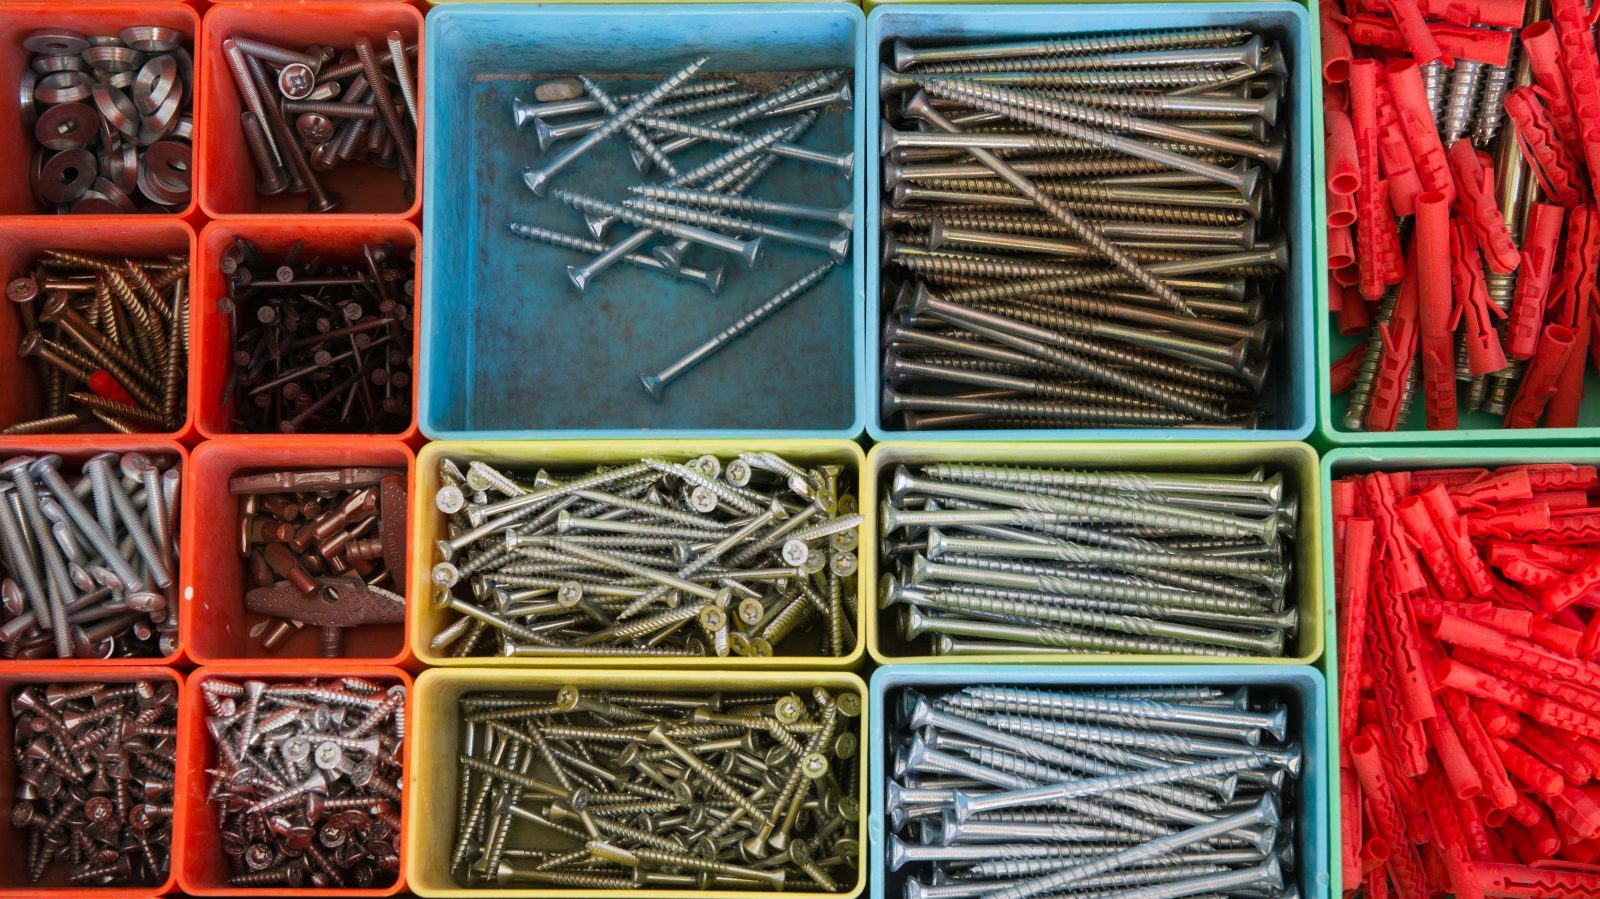 Nails and Screws